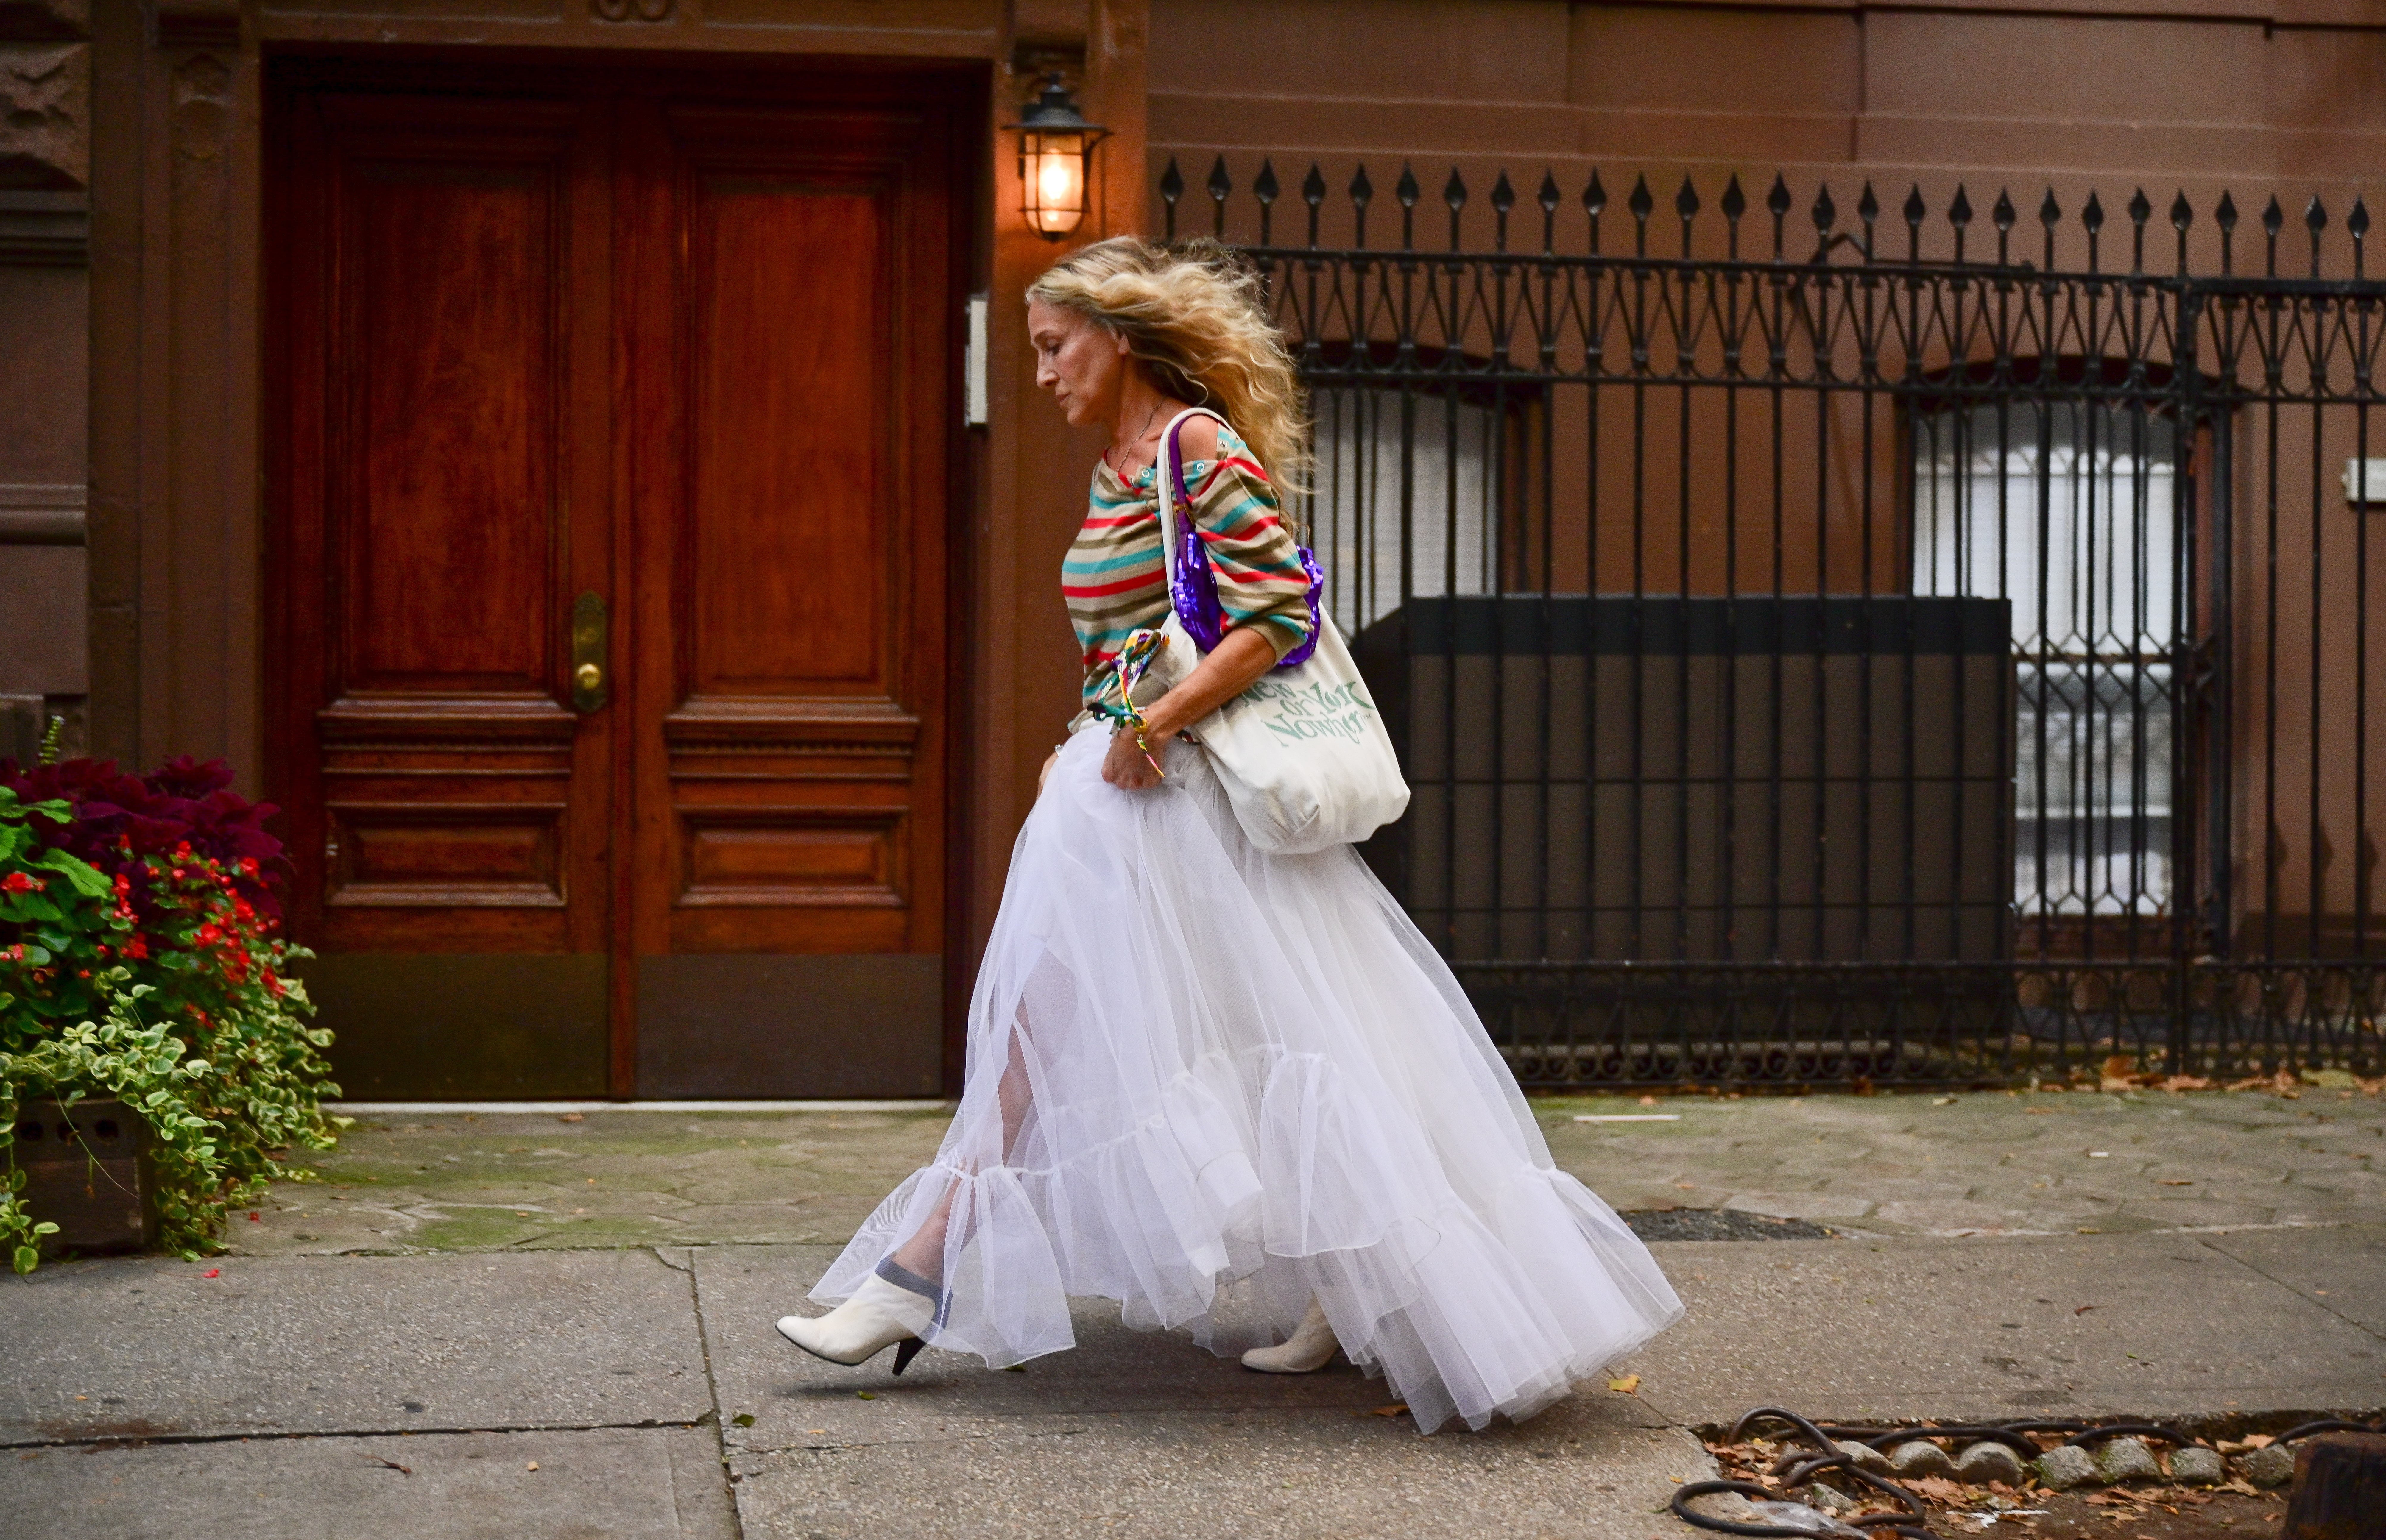 The iconic Fendi baguette bag is back, with the help of Carrie Bradshaw